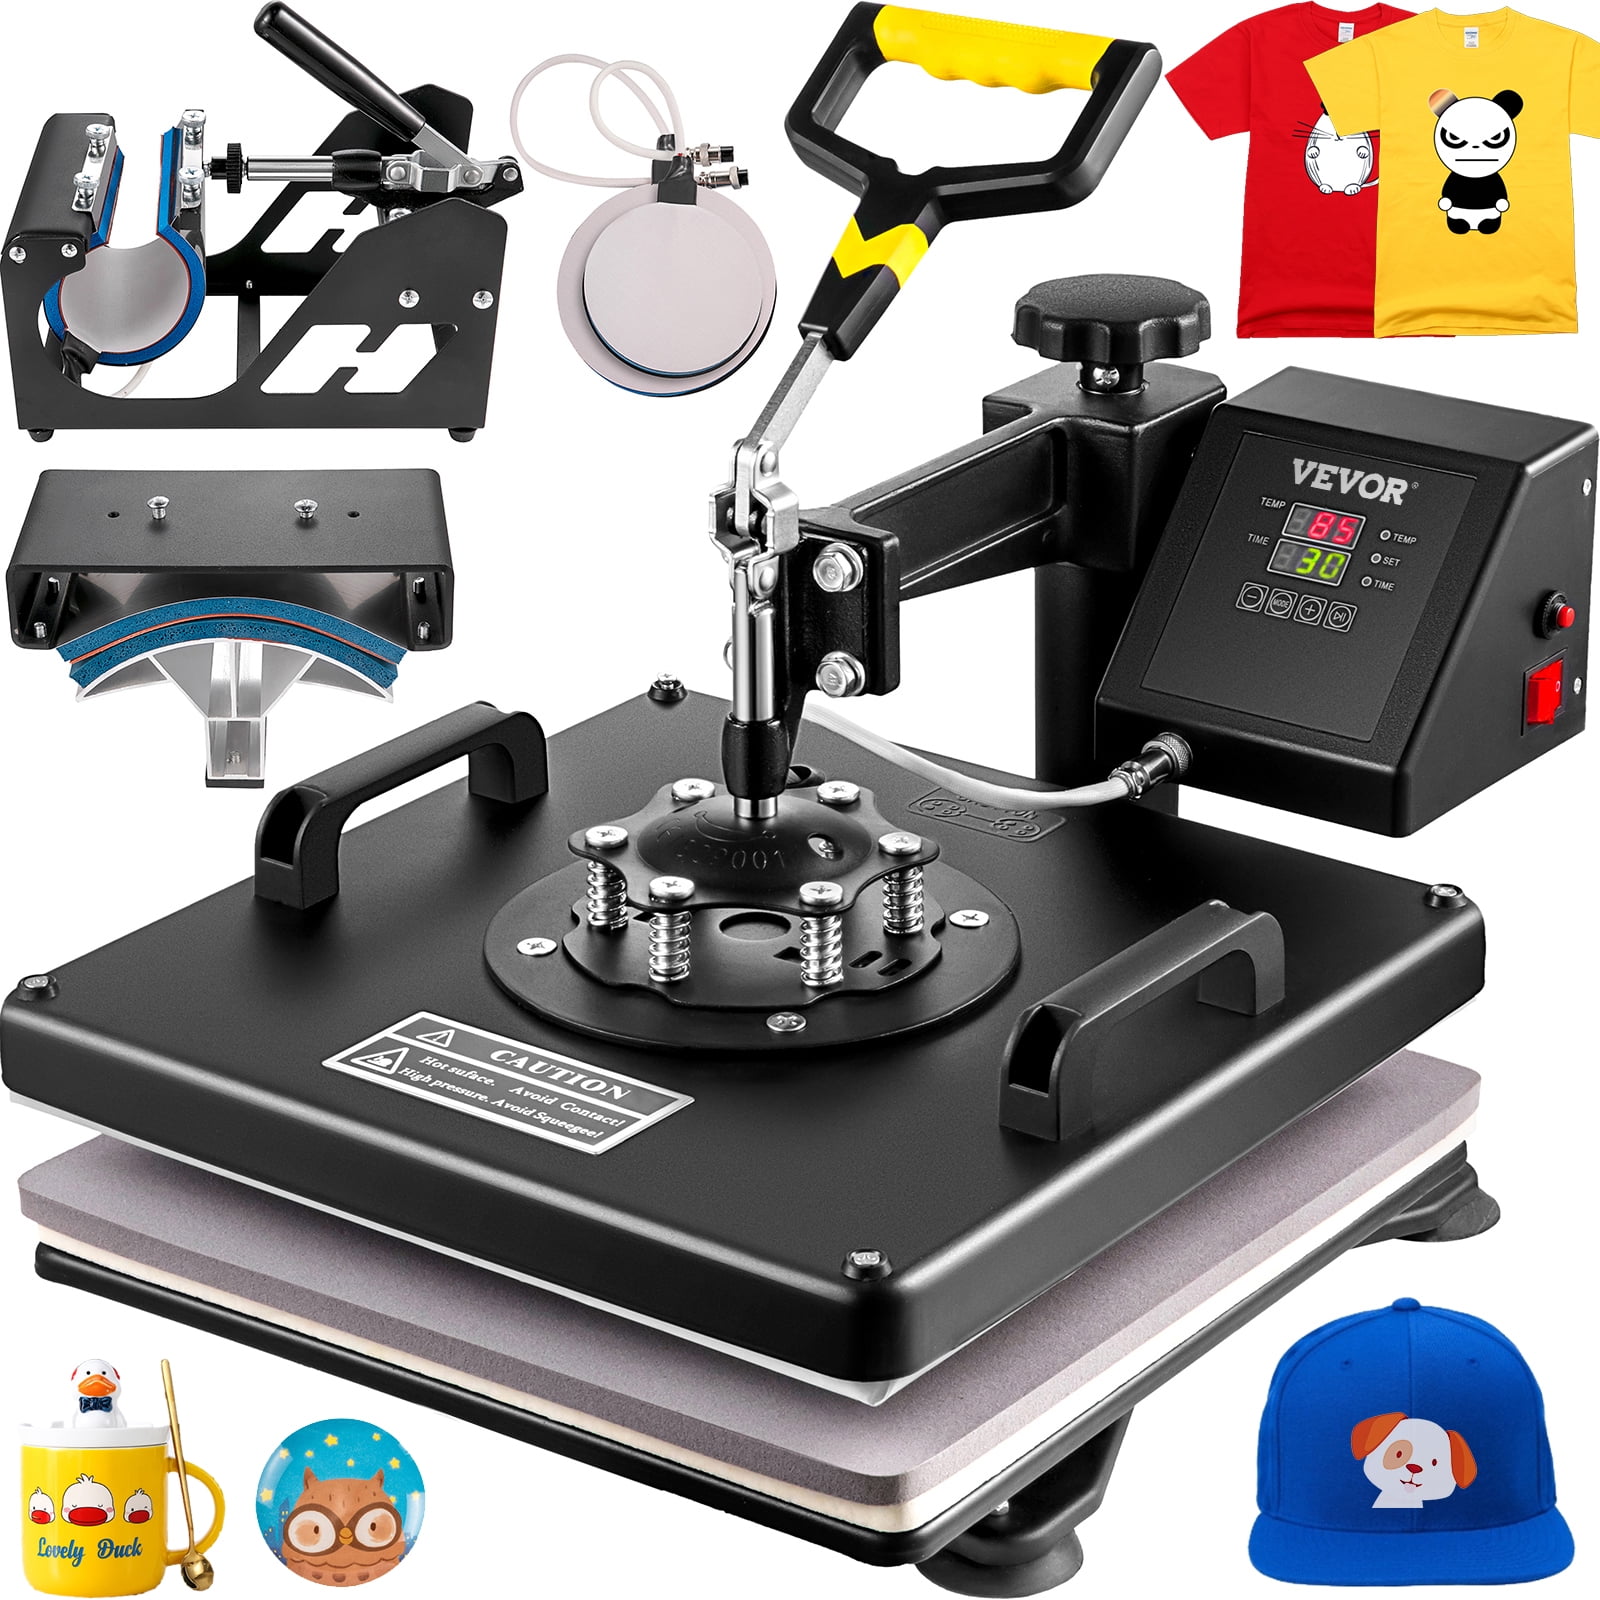  VEVOR Heat Press, Upgrade 5 in 1 Heat Press Machine for T-Shirt  Hat Cap Mug Plate Sublimation, 15x15 inch Anti-Scald Fast Swing Away  Digital Control Multifunction,Red : Arts, Crafts & Sewing